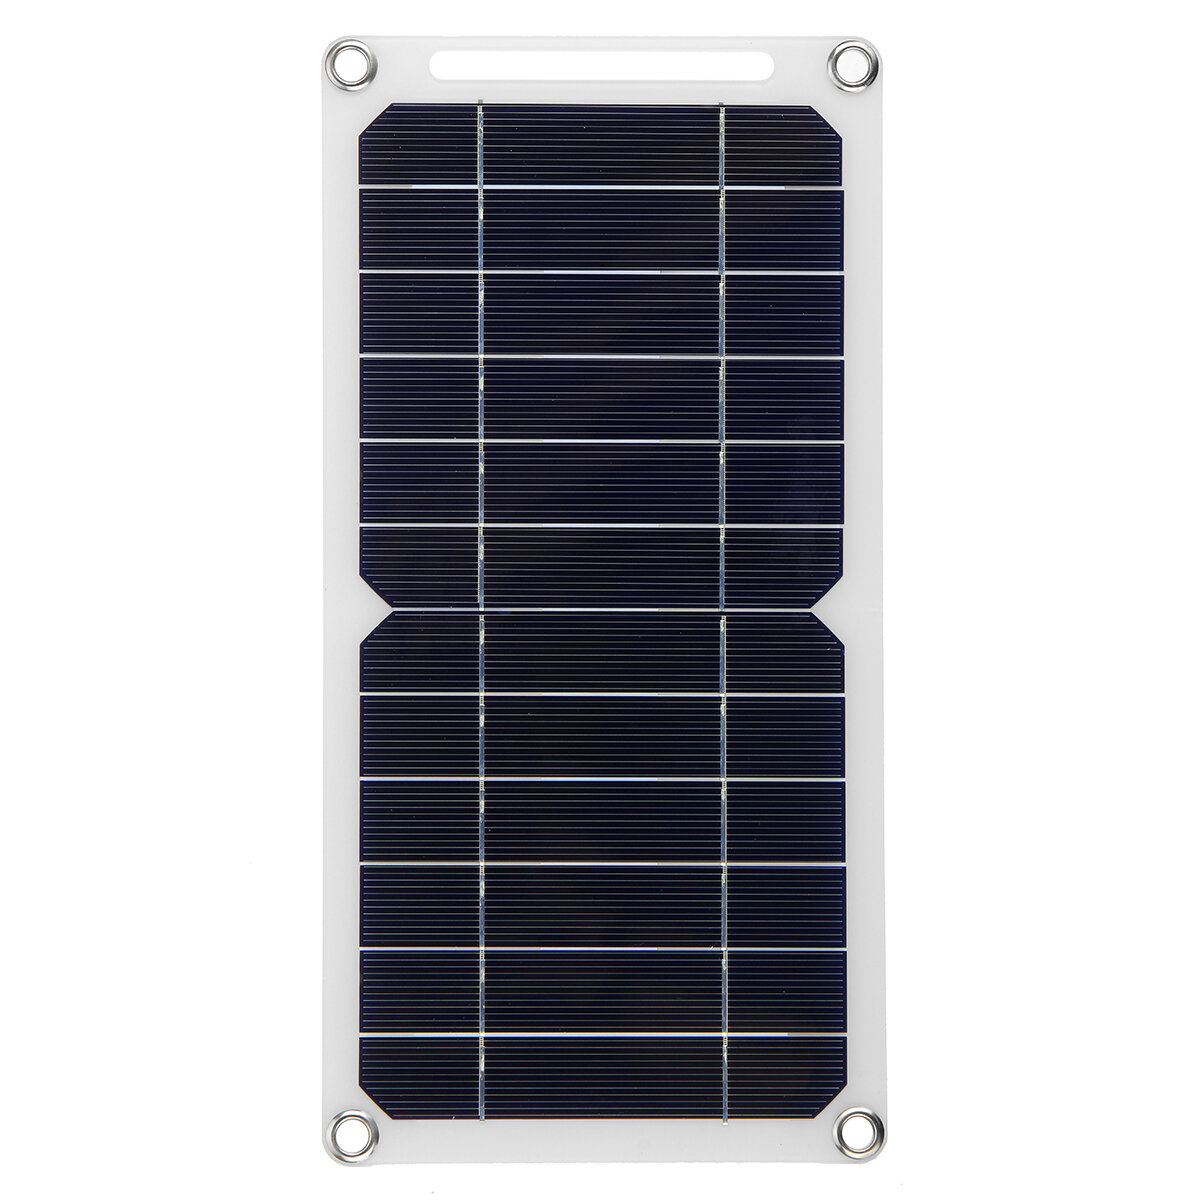 6W Outdoor Solar Panel Waterproof Charger for Hiking Camping Phone Power Use